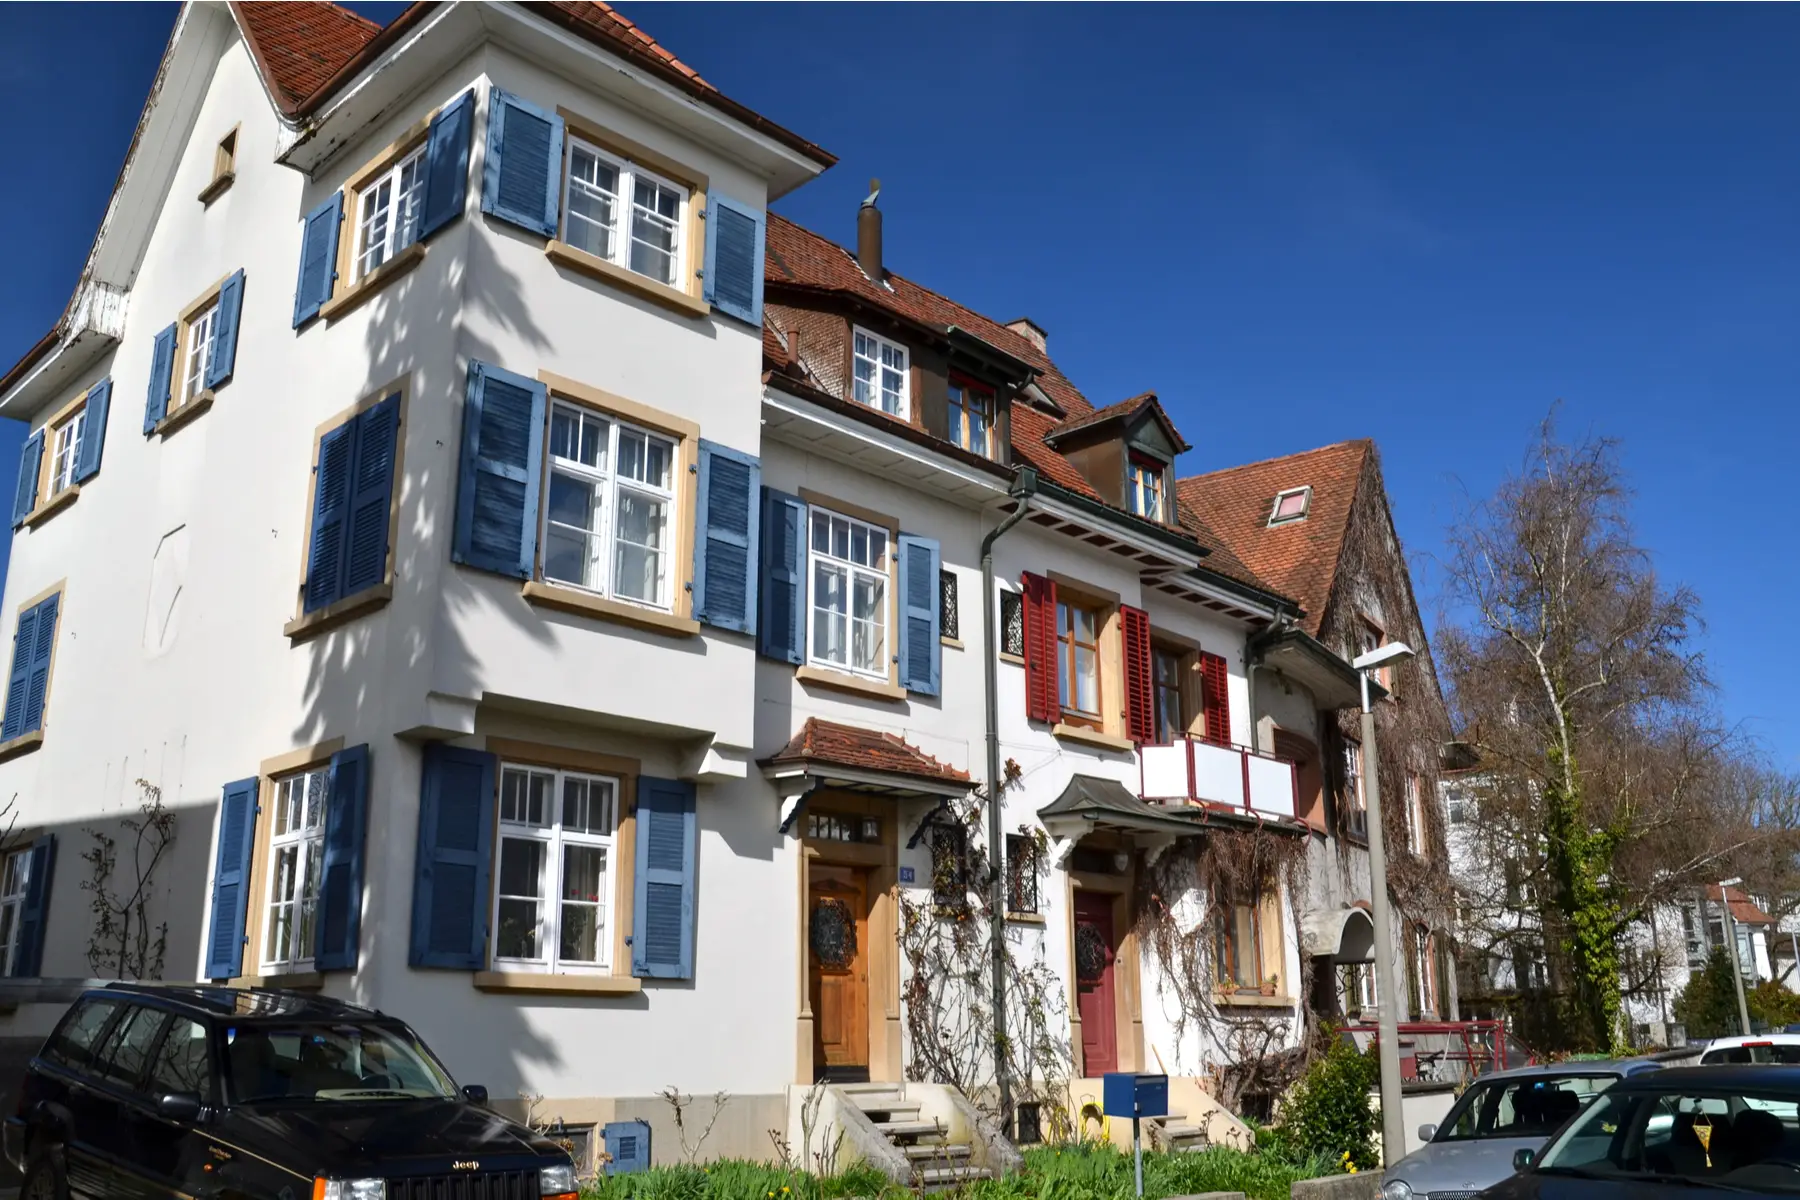 Homes in Riehen